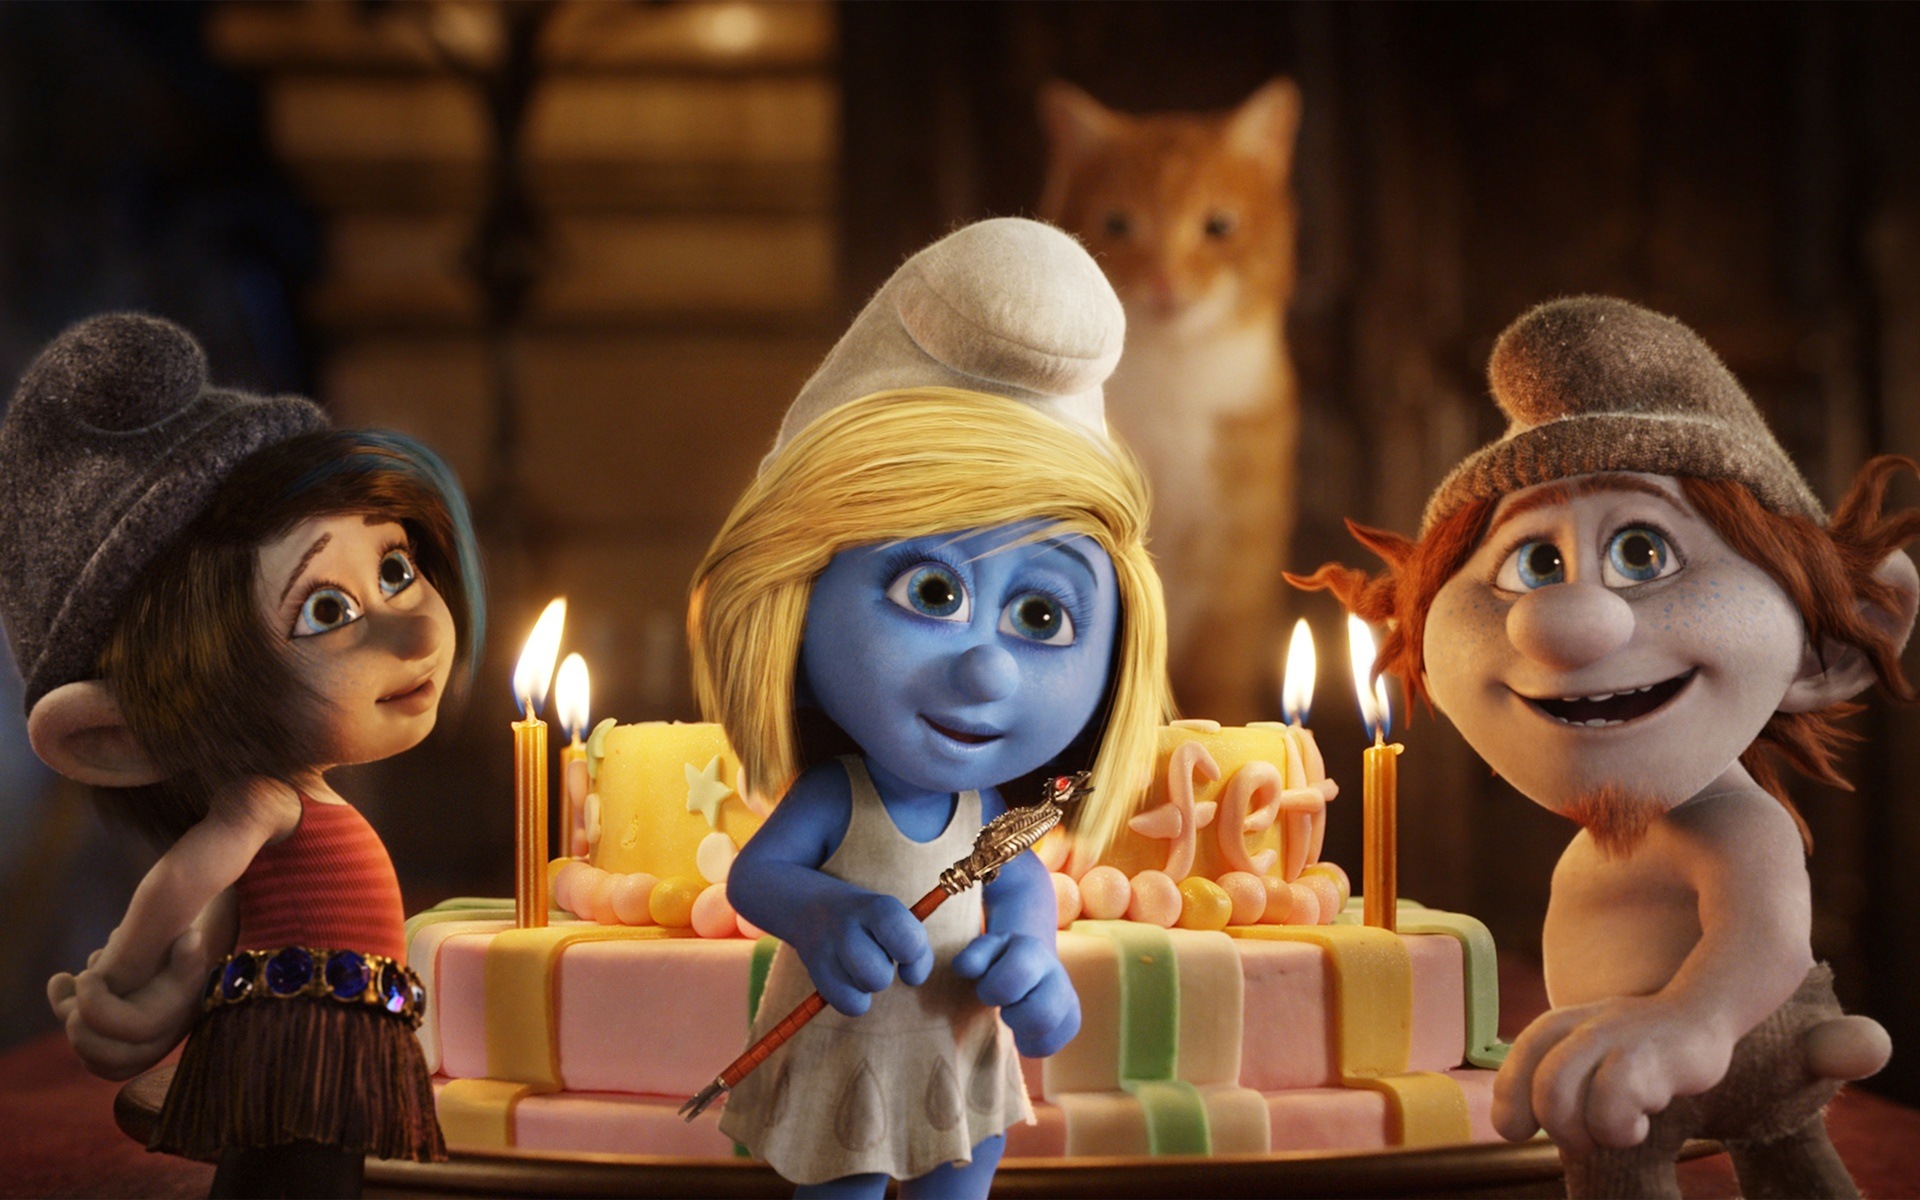 The Smurfs 2 HD movie wallpapers #2 - 1920x1200